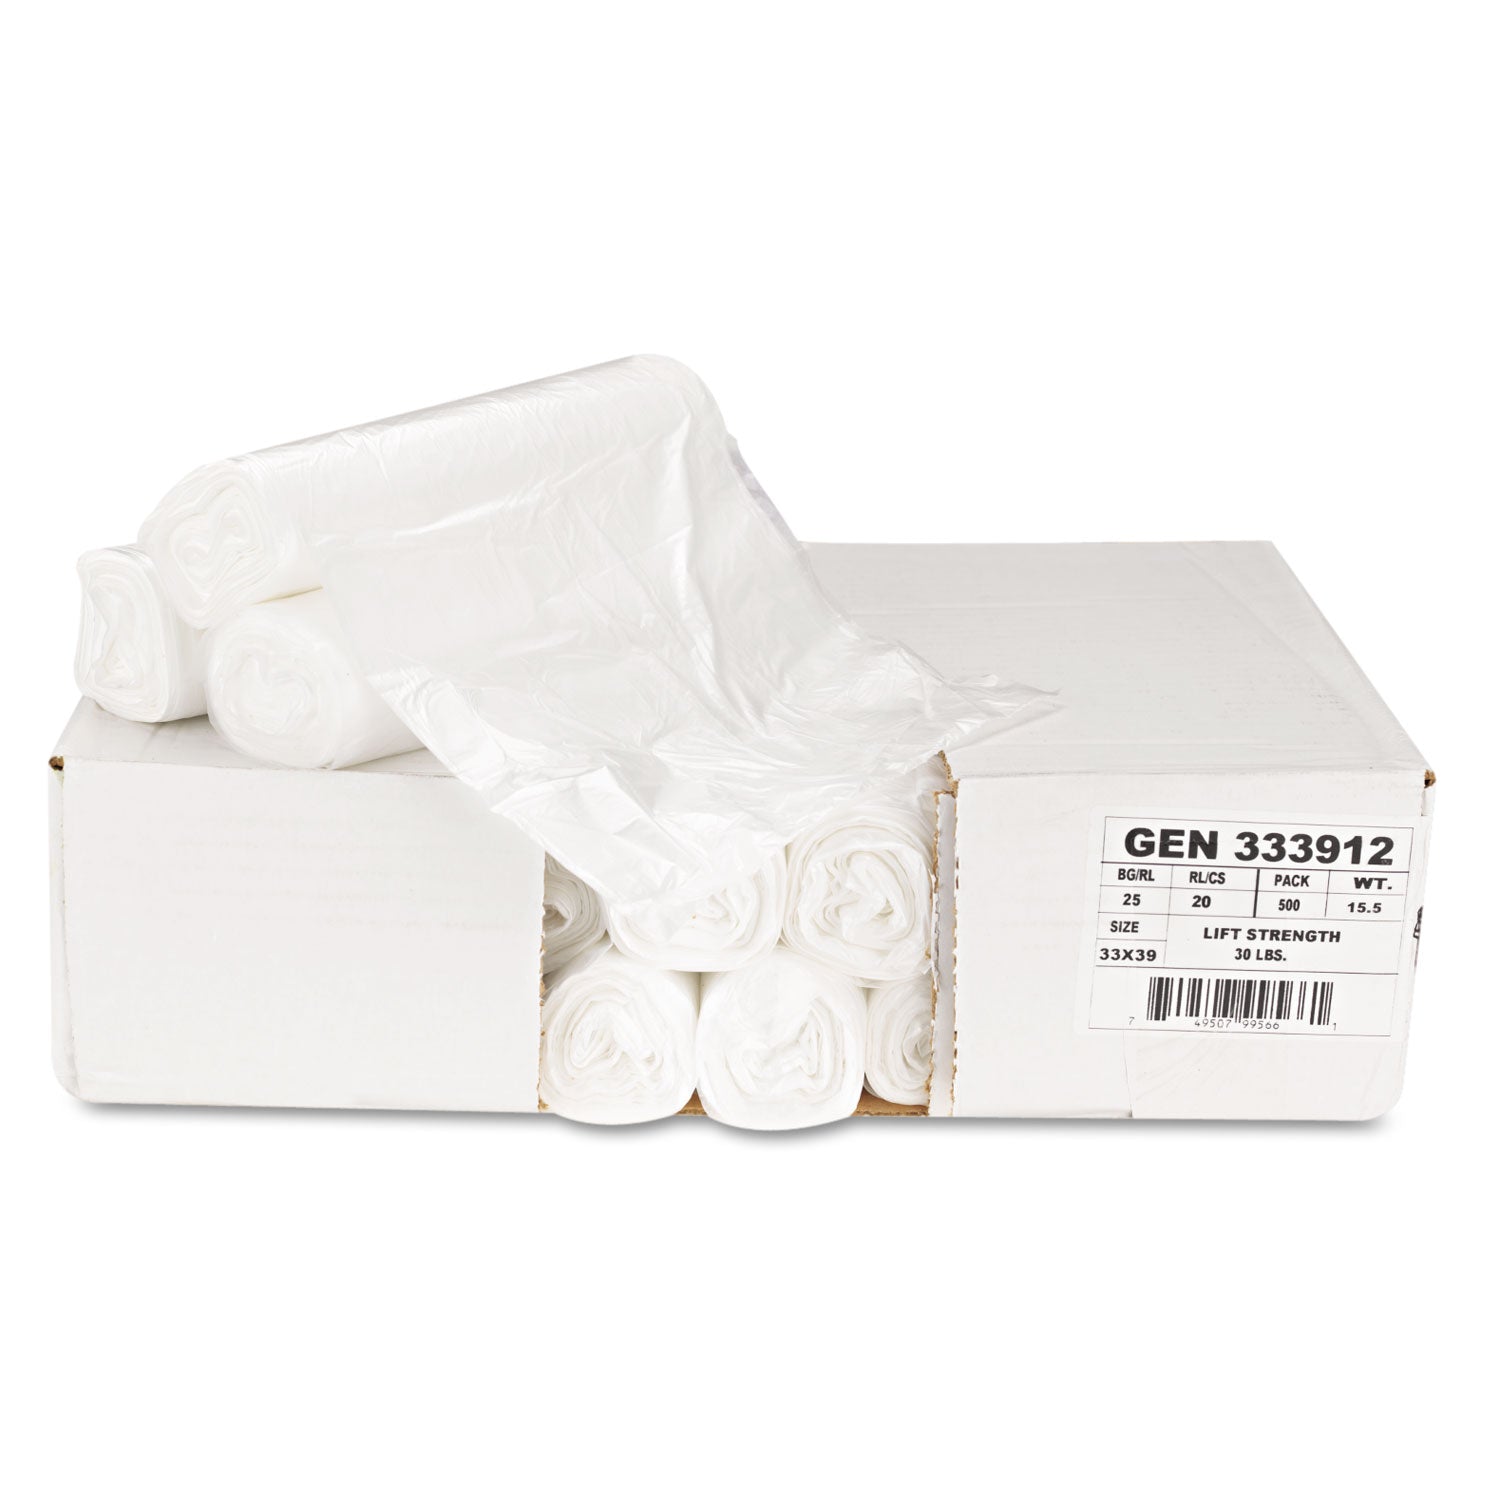 high-density-can-liners-33-gal-9-mic-33-x-39-natural-25-bags-roll-20-rolls-carton_bwk333912 - 8